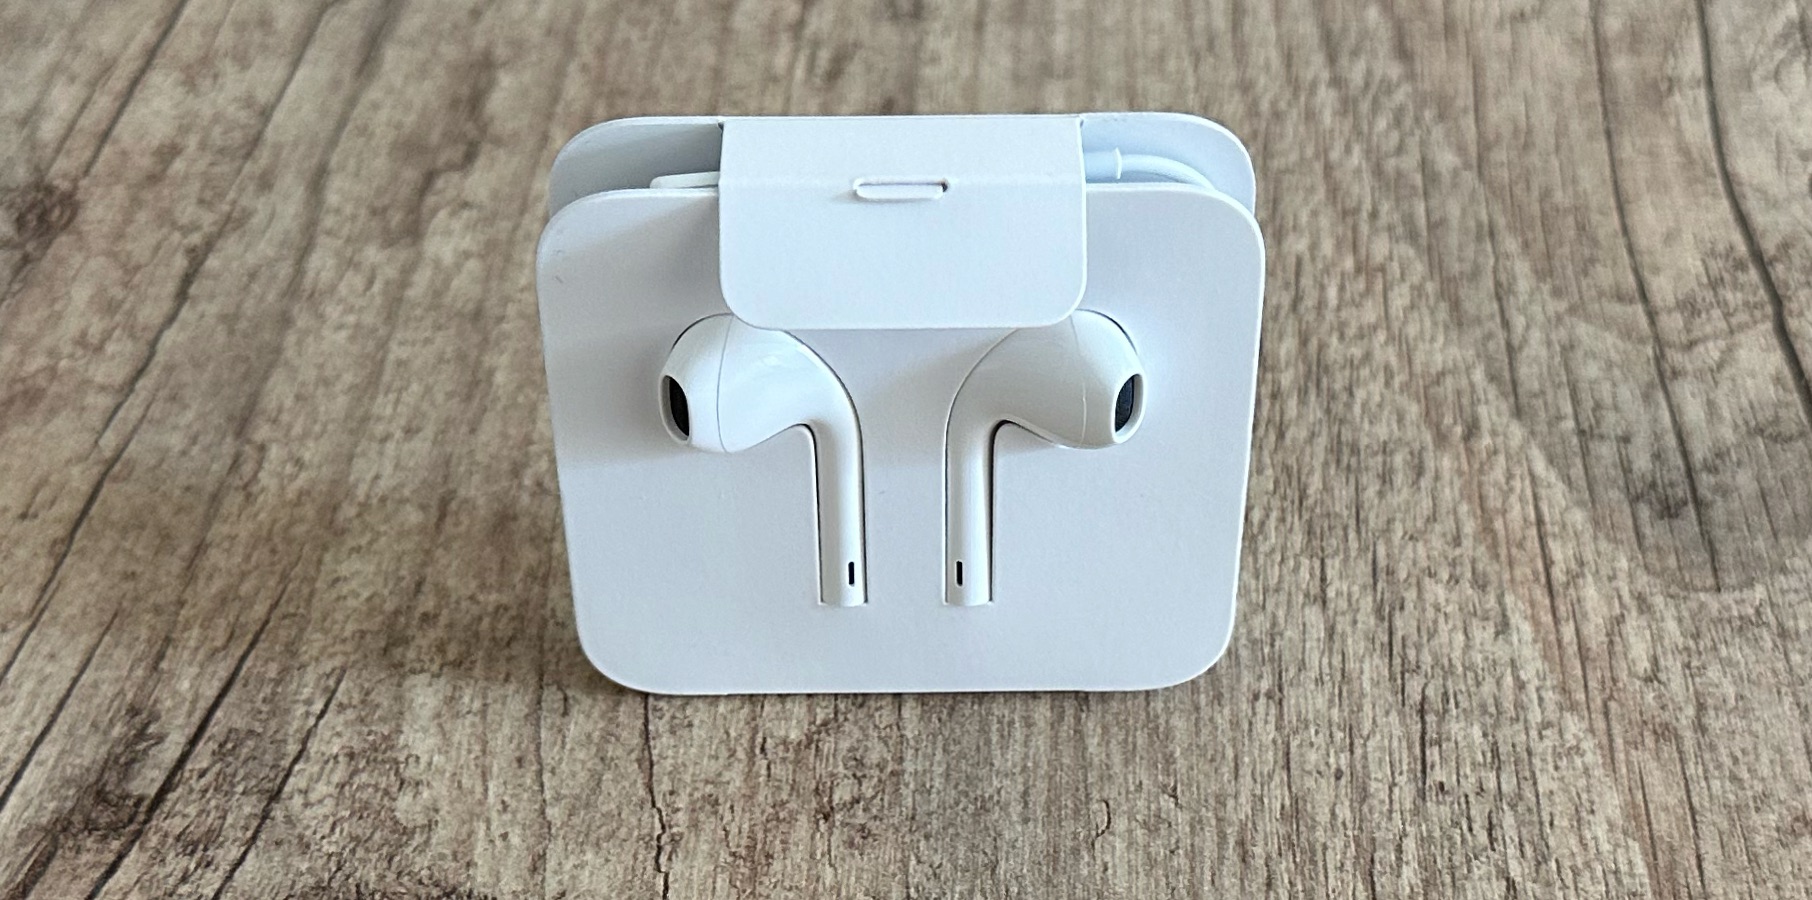 I think Apple should release new EarPods with better sound quality